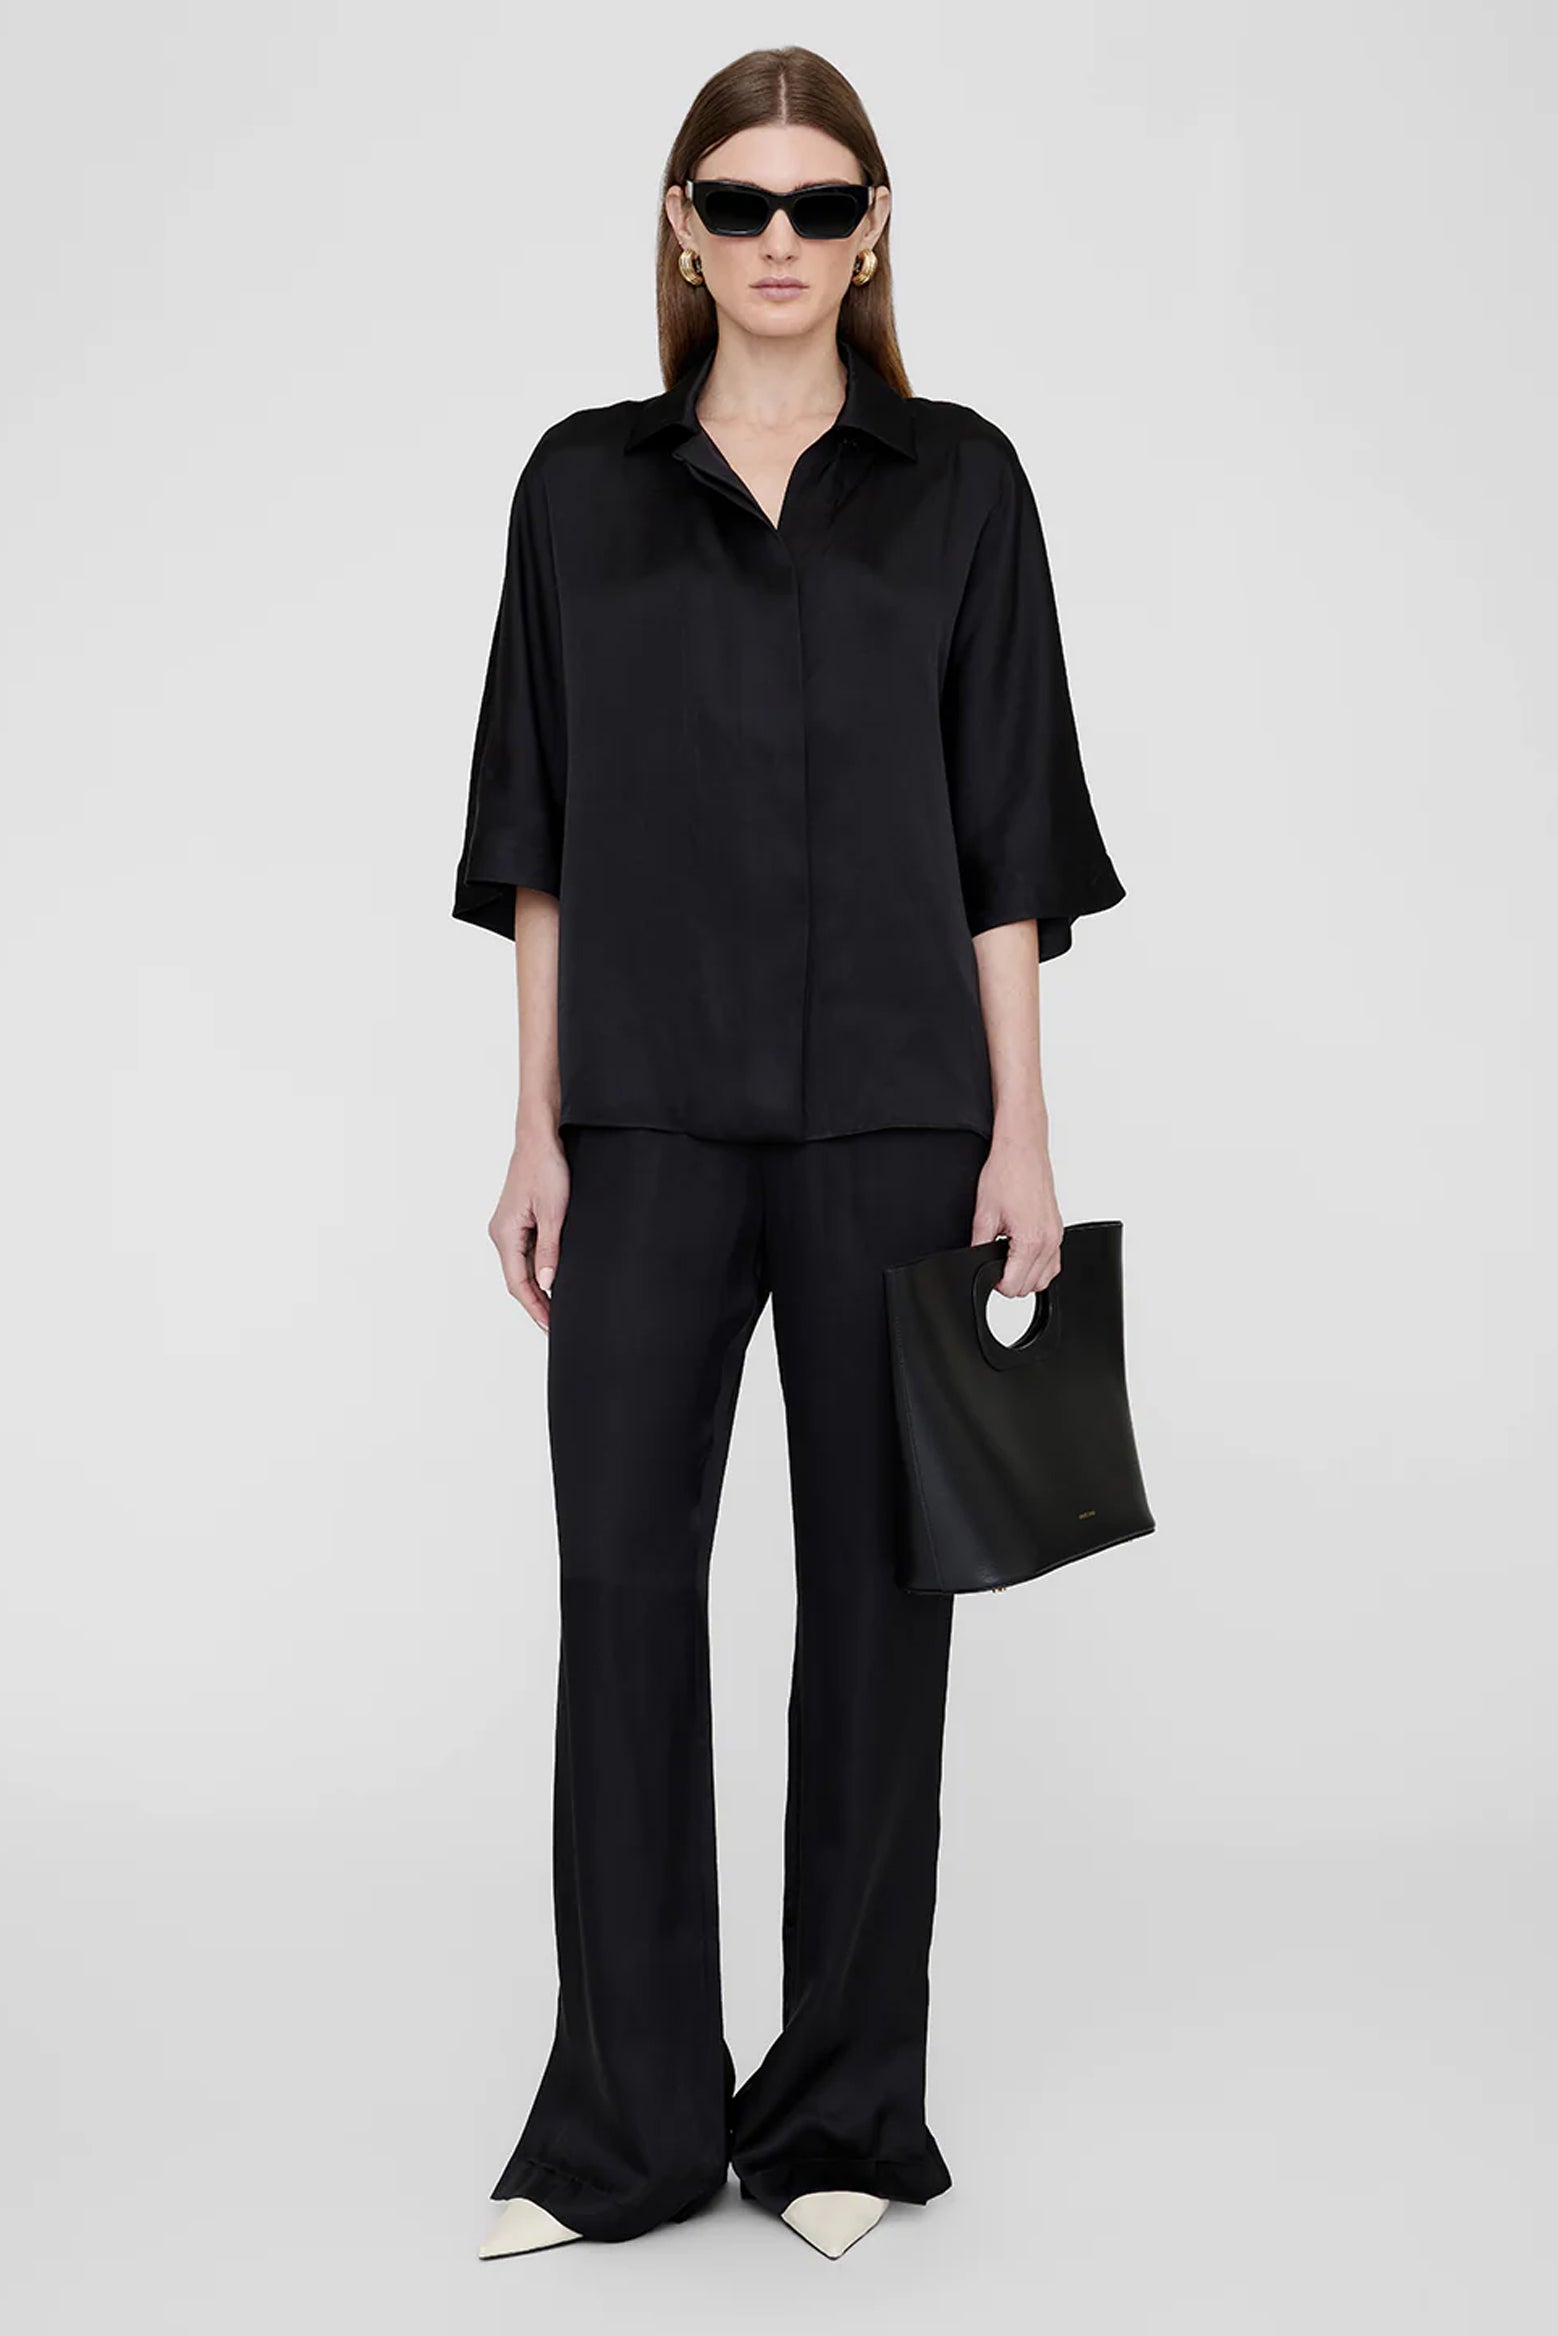 Anine Bing Julia Shirt in Black available at The New Trend Australia.